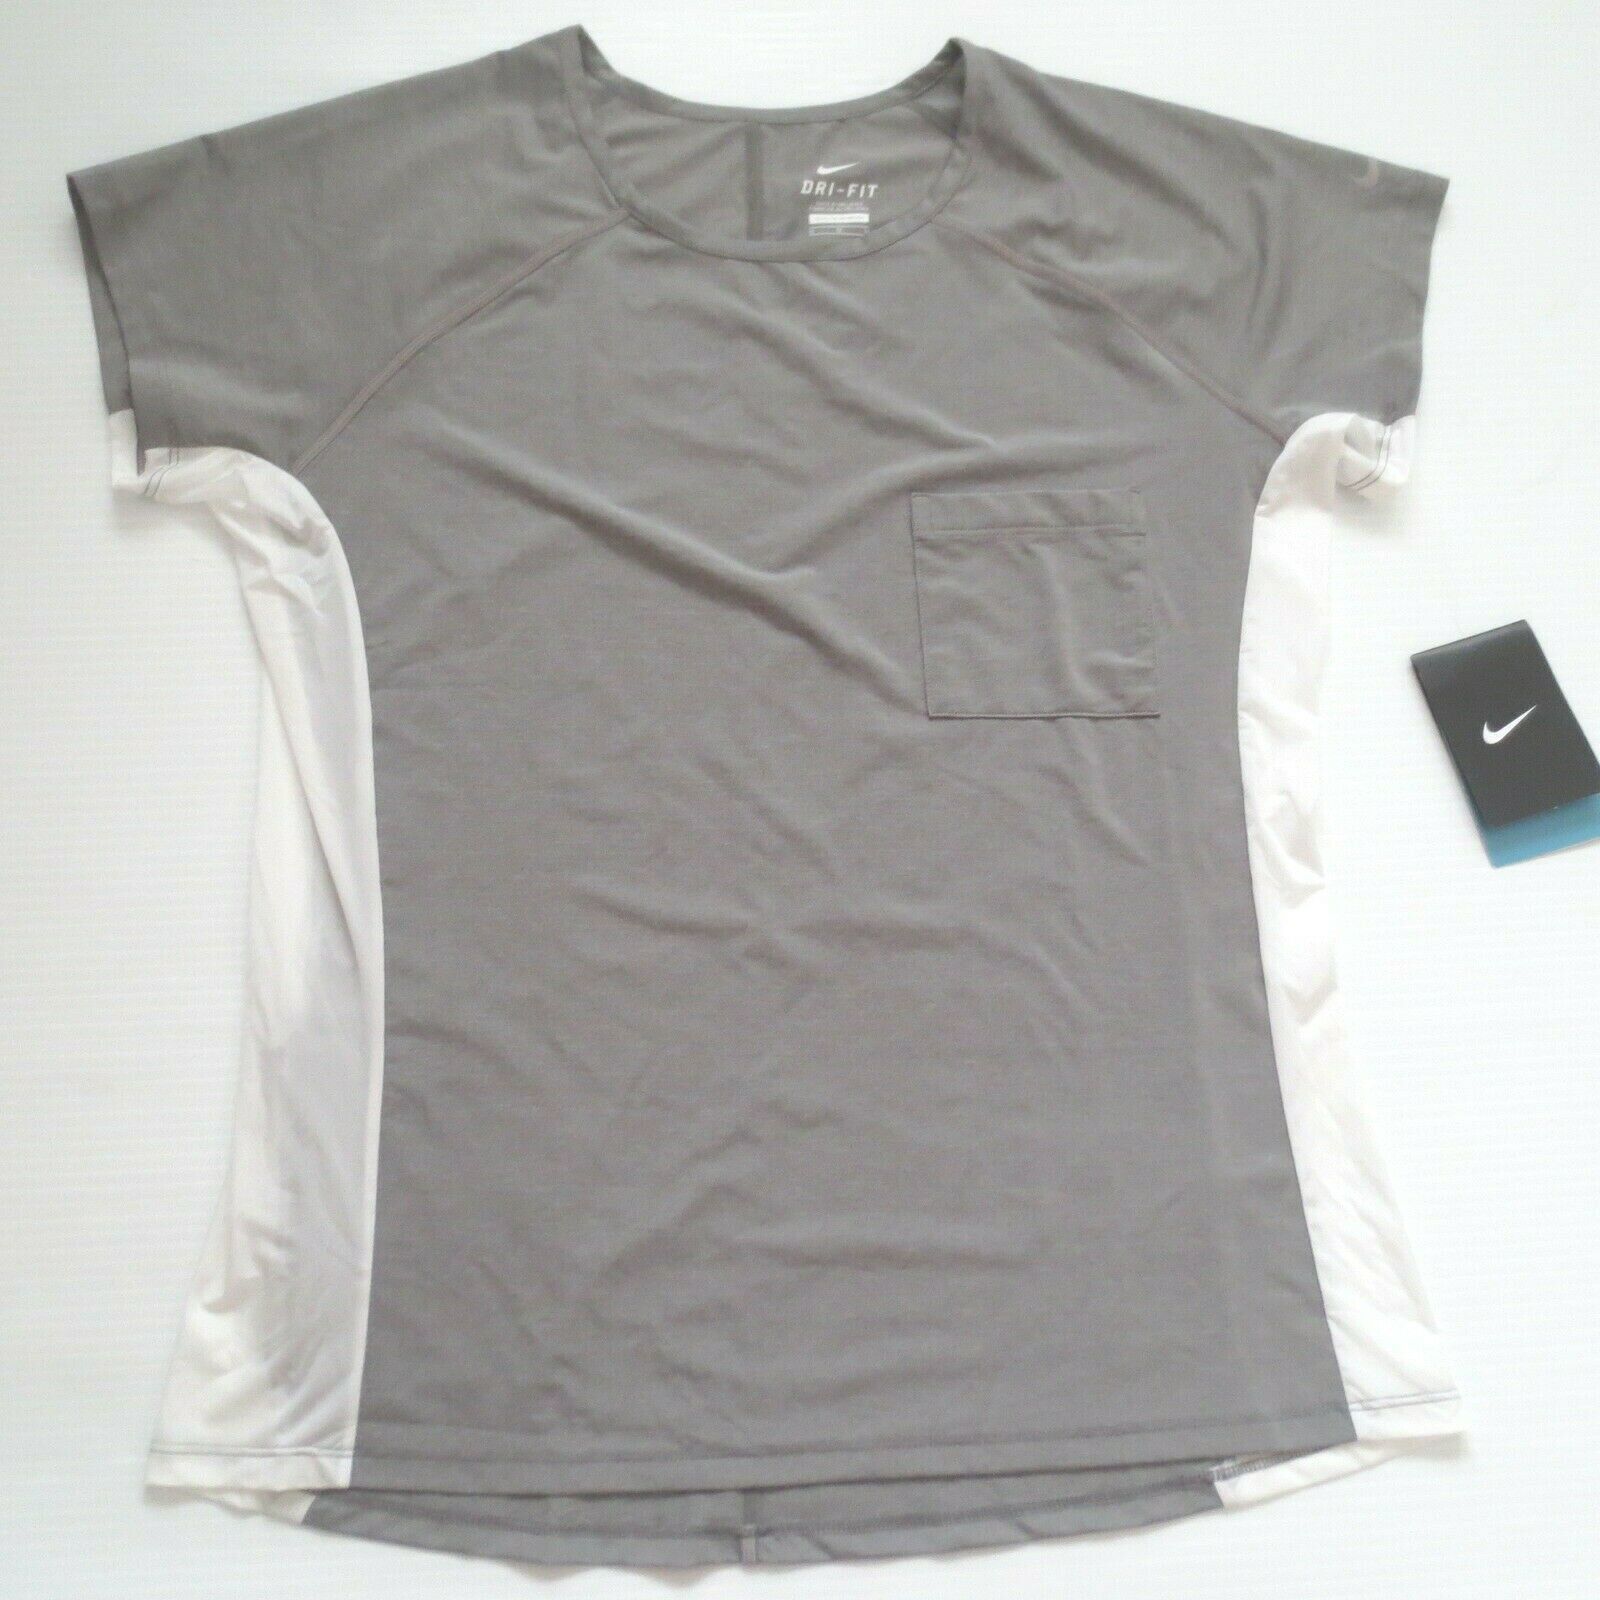 Primary image for Nike Women Reflective Short Sleeve Shirt - 618106 - Gray 265 - Size M - NWT